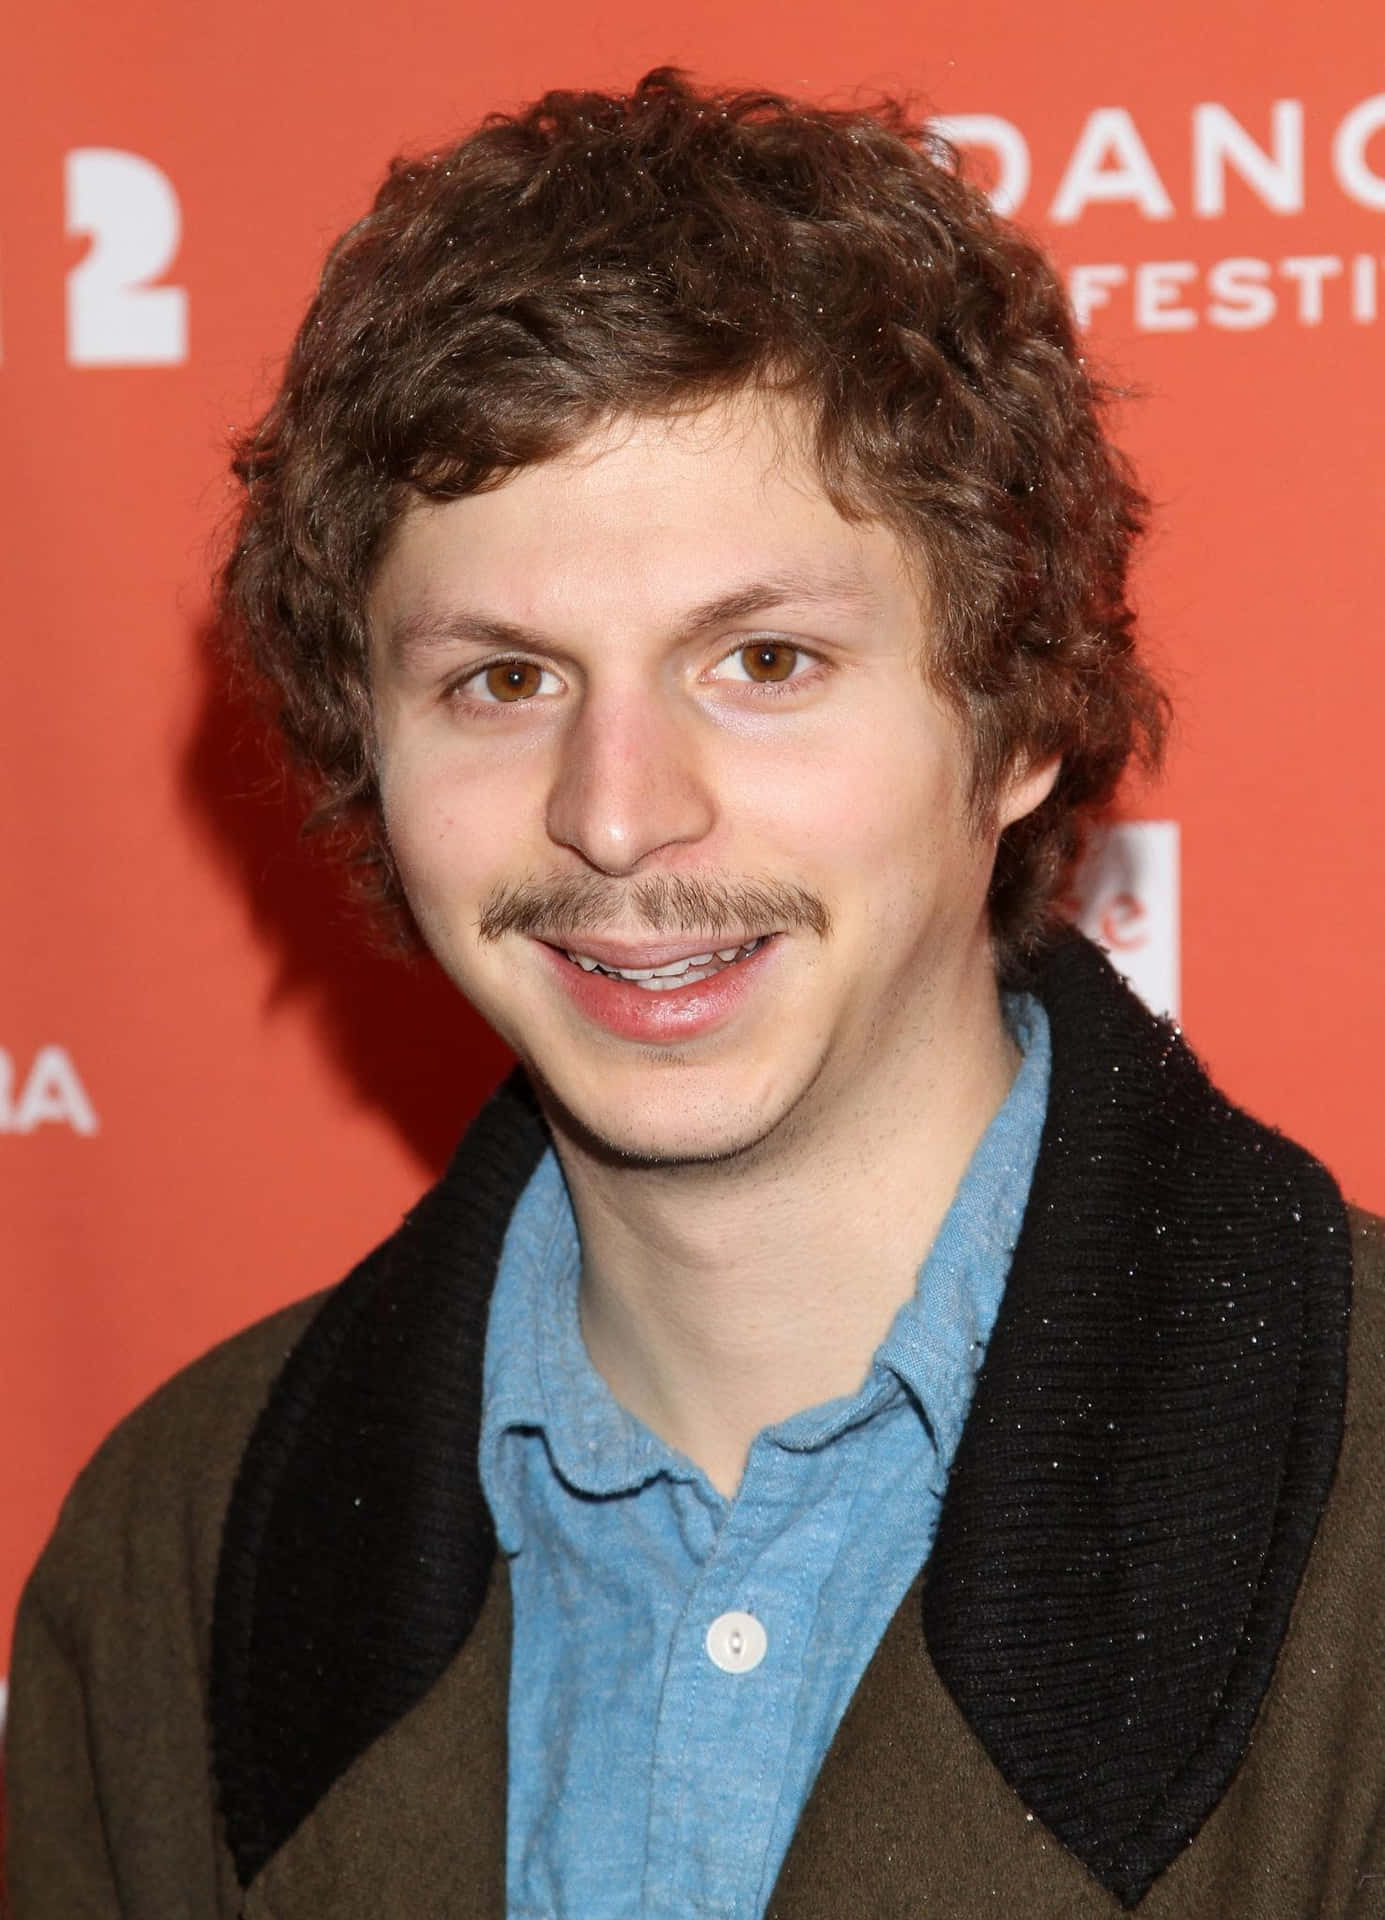 Michael Cera Shines In Hollywood As A Versatile Actor" Wallpaper